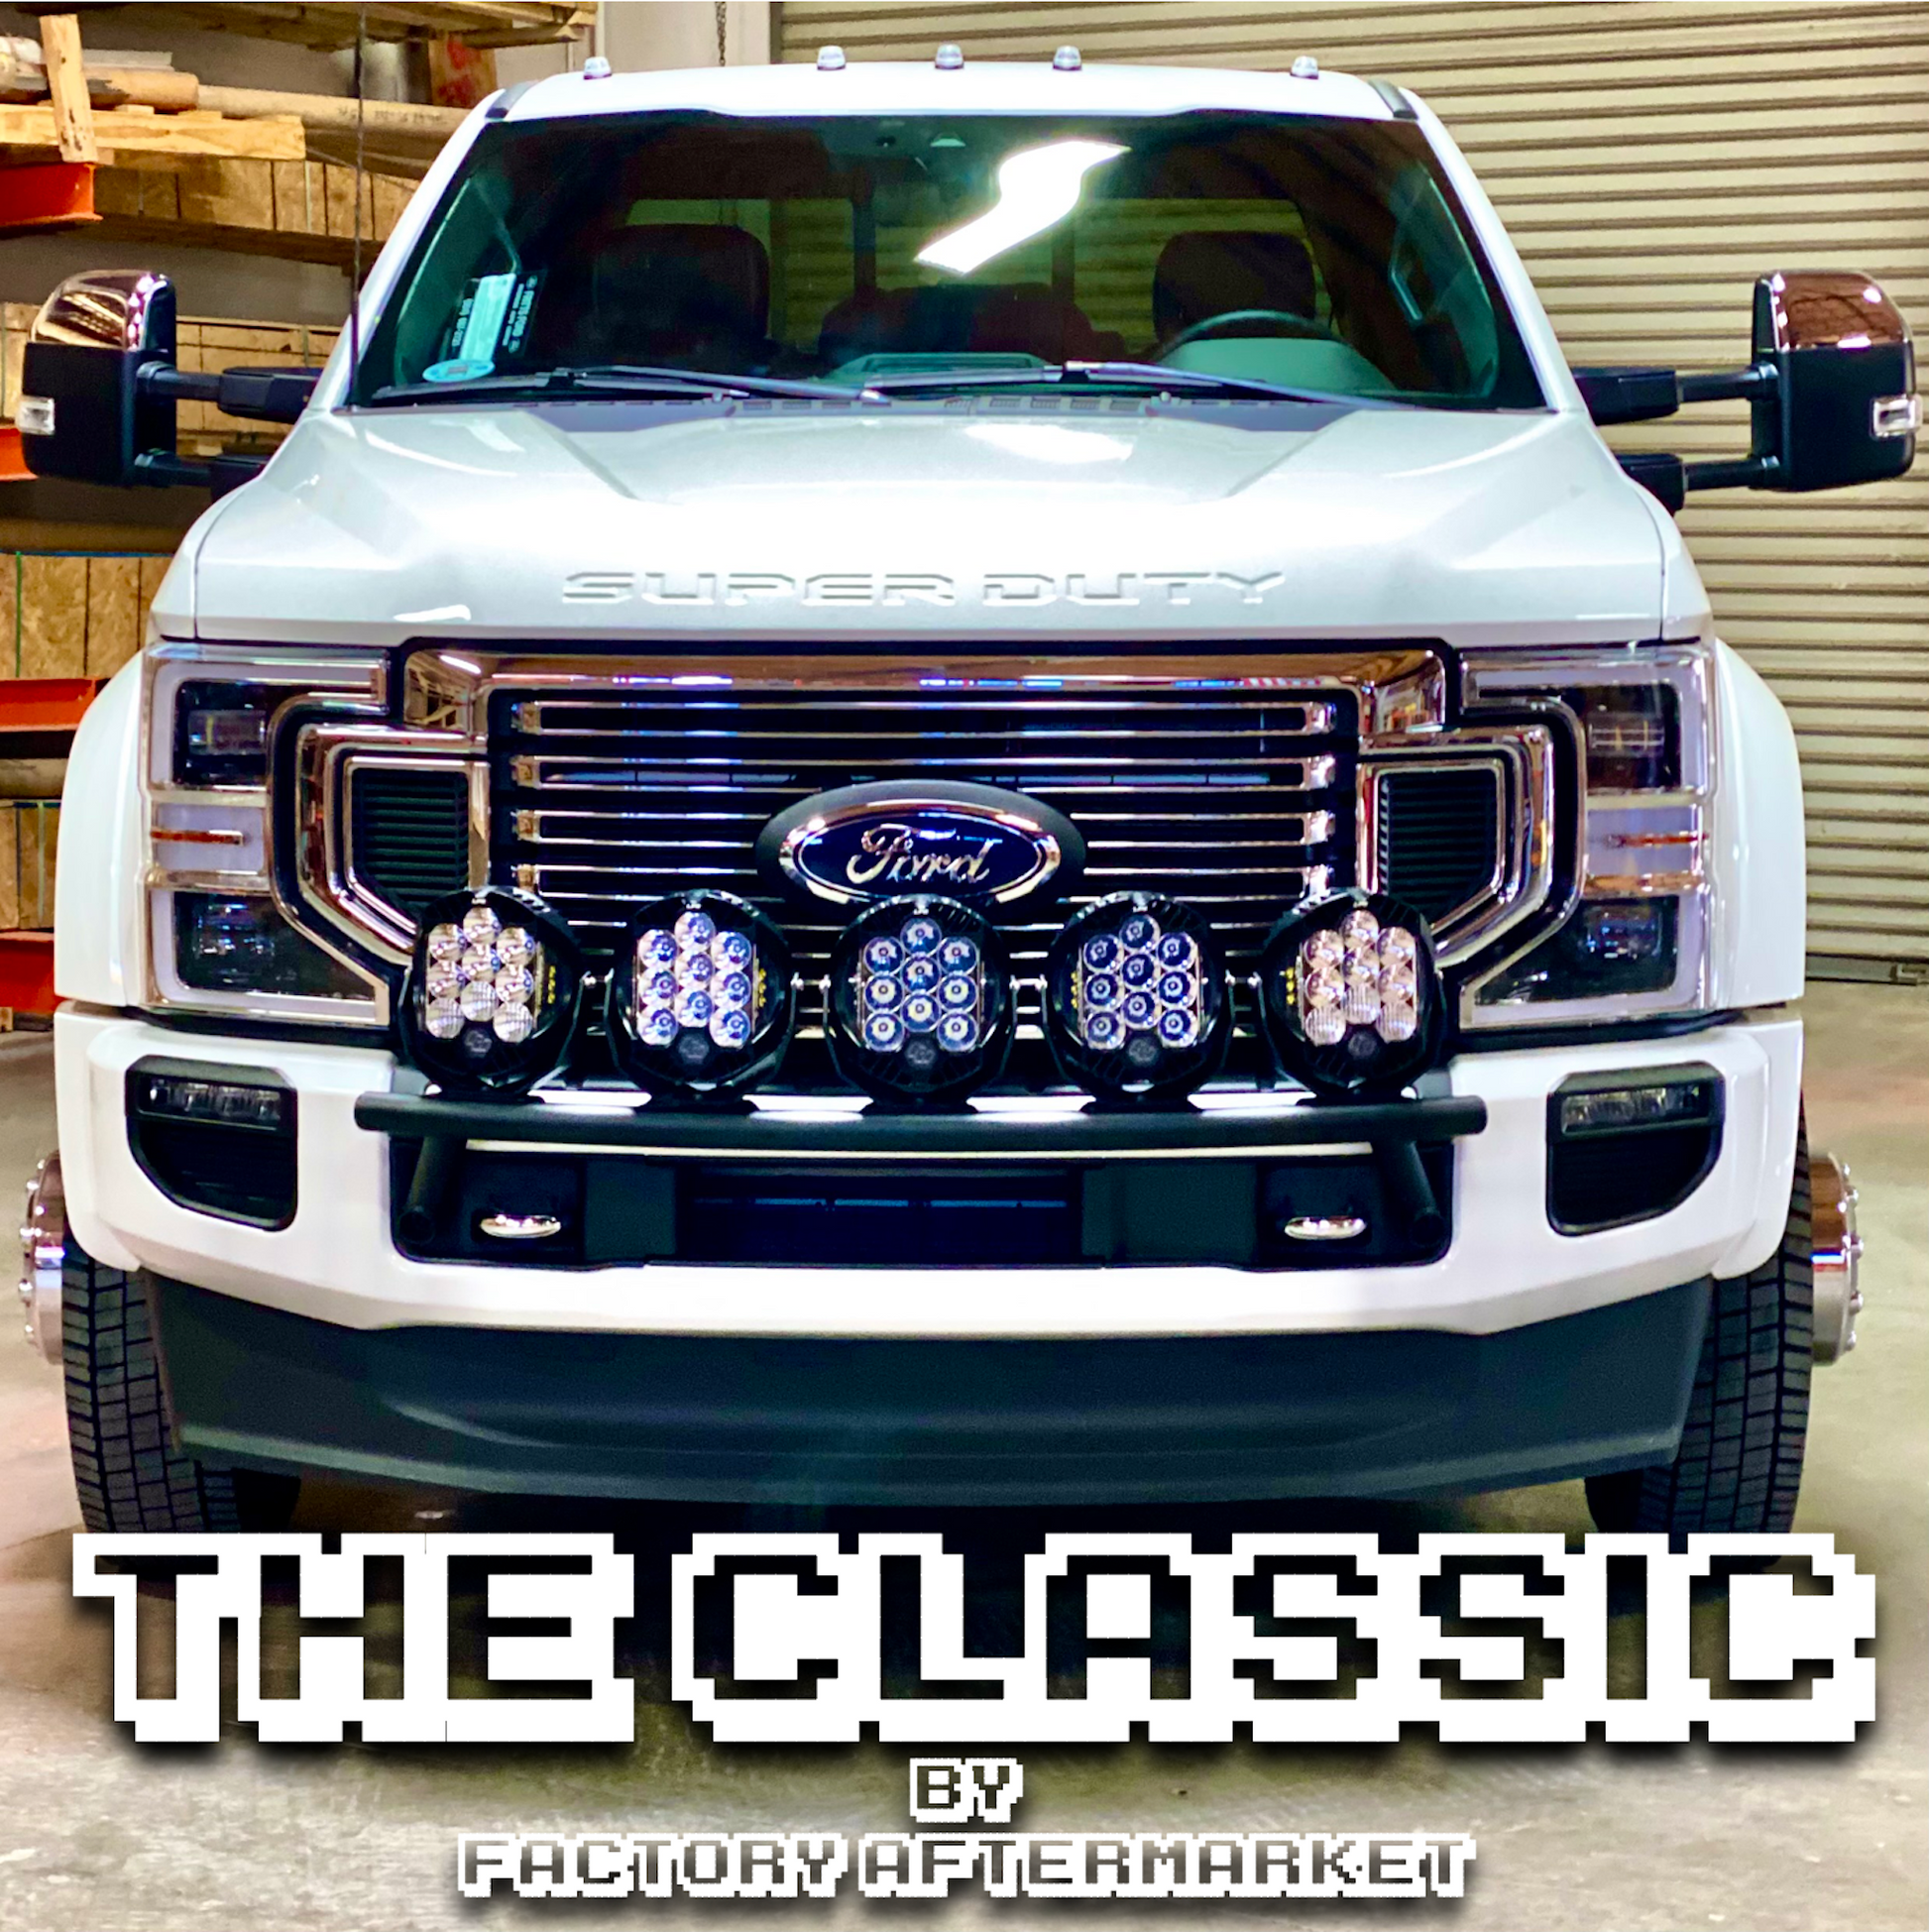 Ford Super-duty light bar F-250 F-350 F-450 F-550 Light Bar off-road overland expeditions truck parts LED LP9 accessories 2017 2018 2019 2020 2021 2022 2023